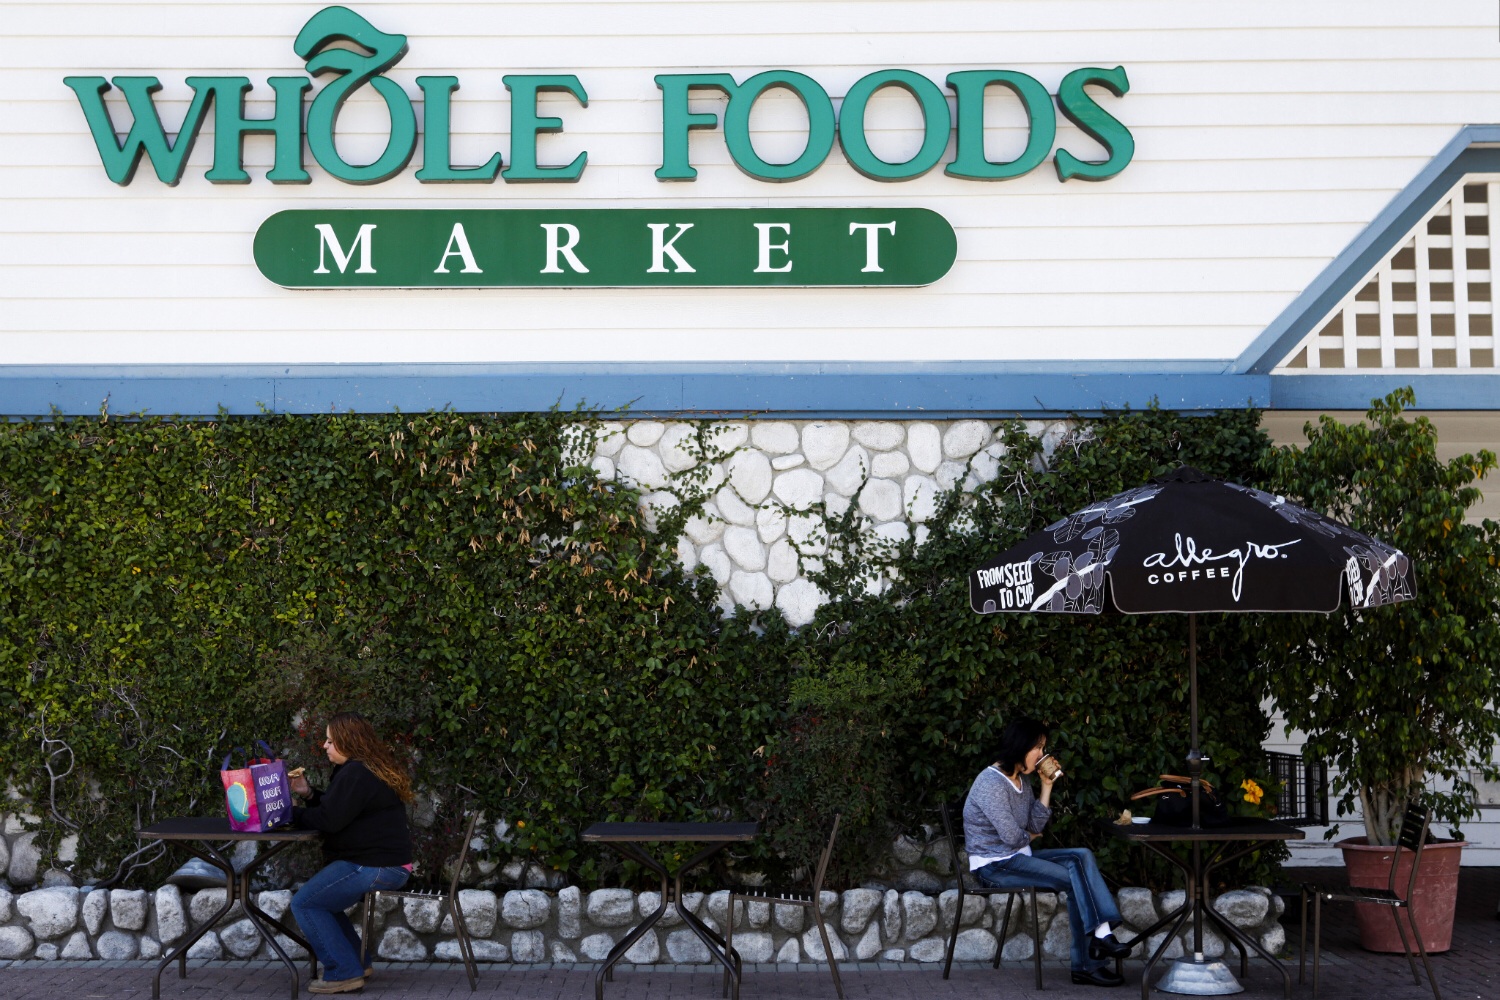 A Whole Foods Market in Redondo Beach, Calif. on November 5, 2013.